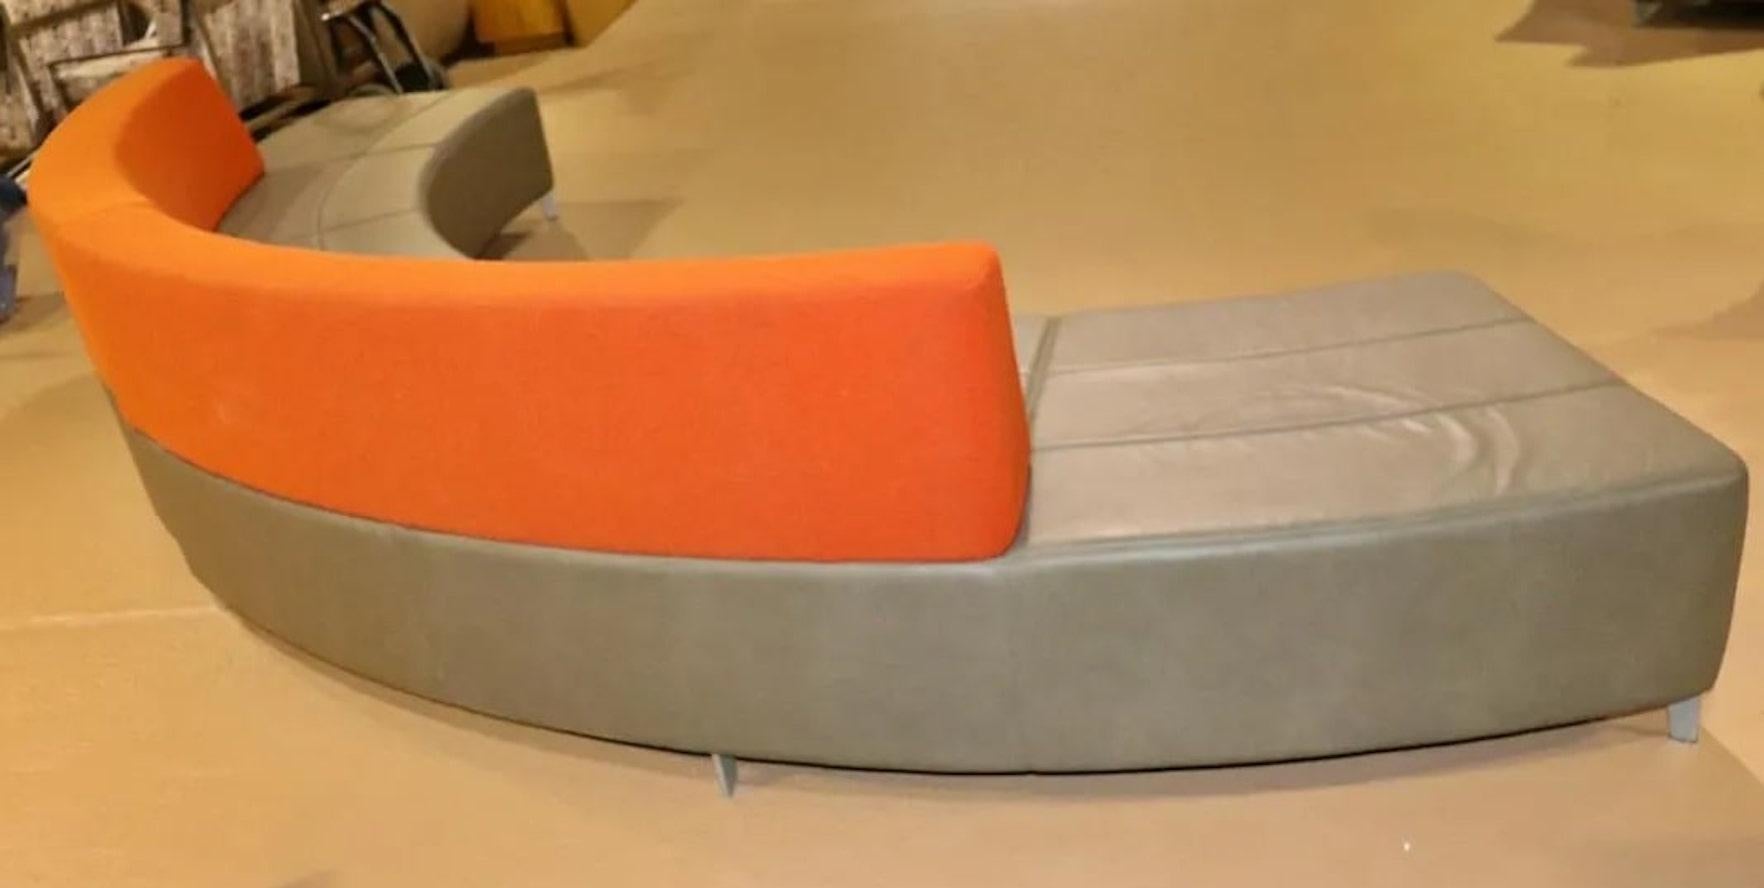 American Two Piece Sofa, Design Institute of American Design im Zustand „Gut“ im Angebot in Brooklyn, NY